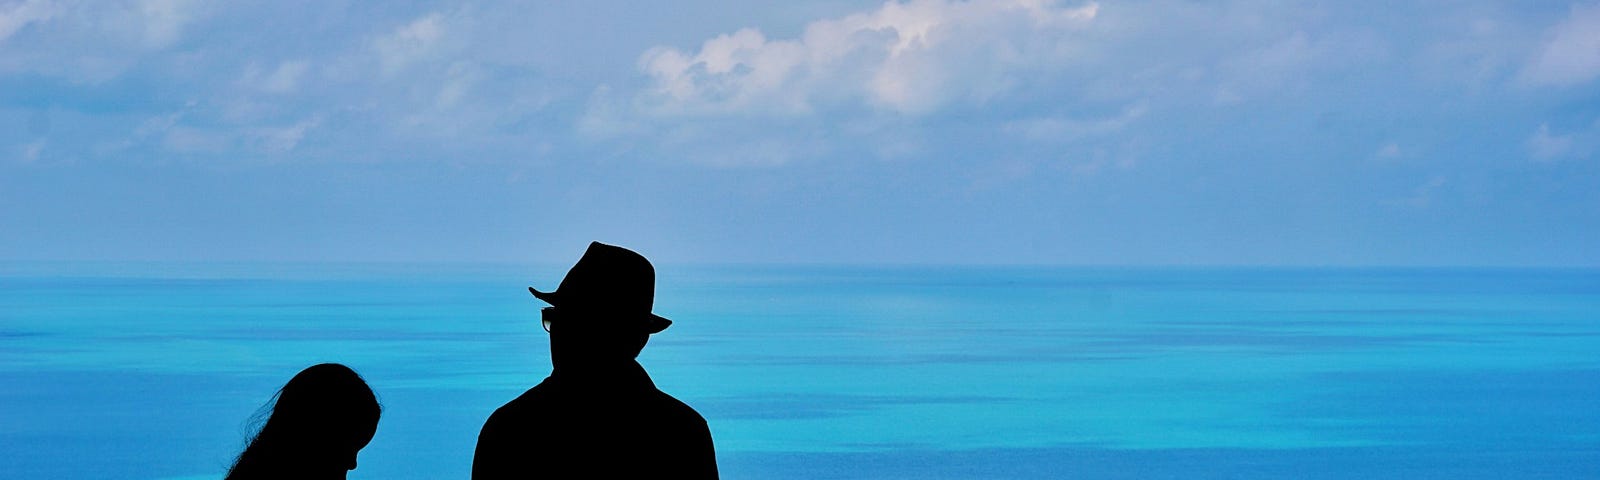 silhouette of a man and girl against a blue sky and seascape